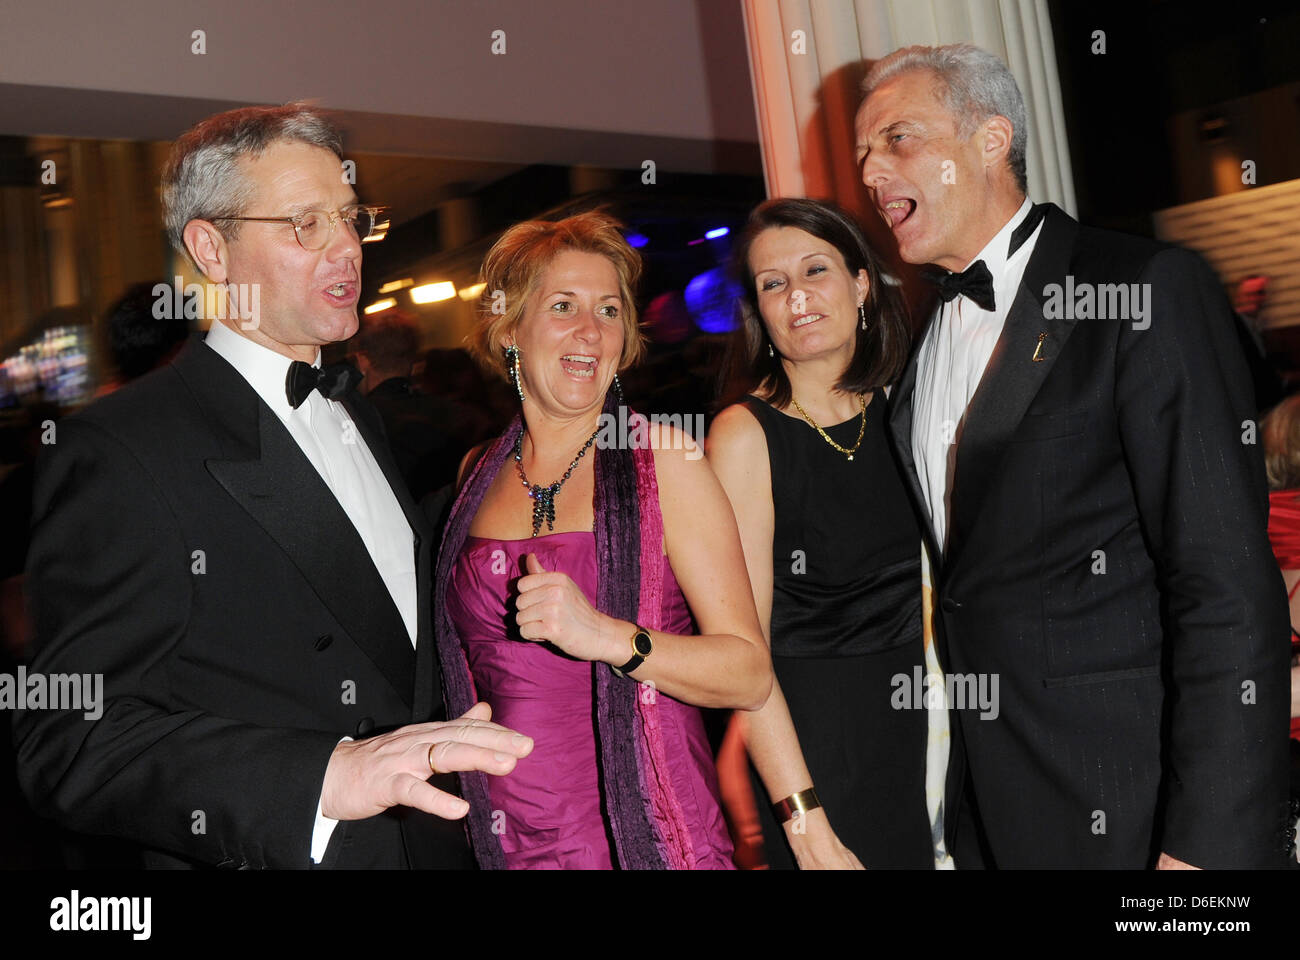 German politician Norbert Röttgen (L-R), Federal Minister for the Environment, Nature Conservation and Nuclear Safety, and his wife Ebba Herfs-Röttgen and German minister of transport Peter Ramsauer (R) and his wife Susanne celebrate during the party of 47th Golden Camera award in Berlin, Germany, 4 February 2012. The award honours outstanding achievements in television, film and e Stock Photo